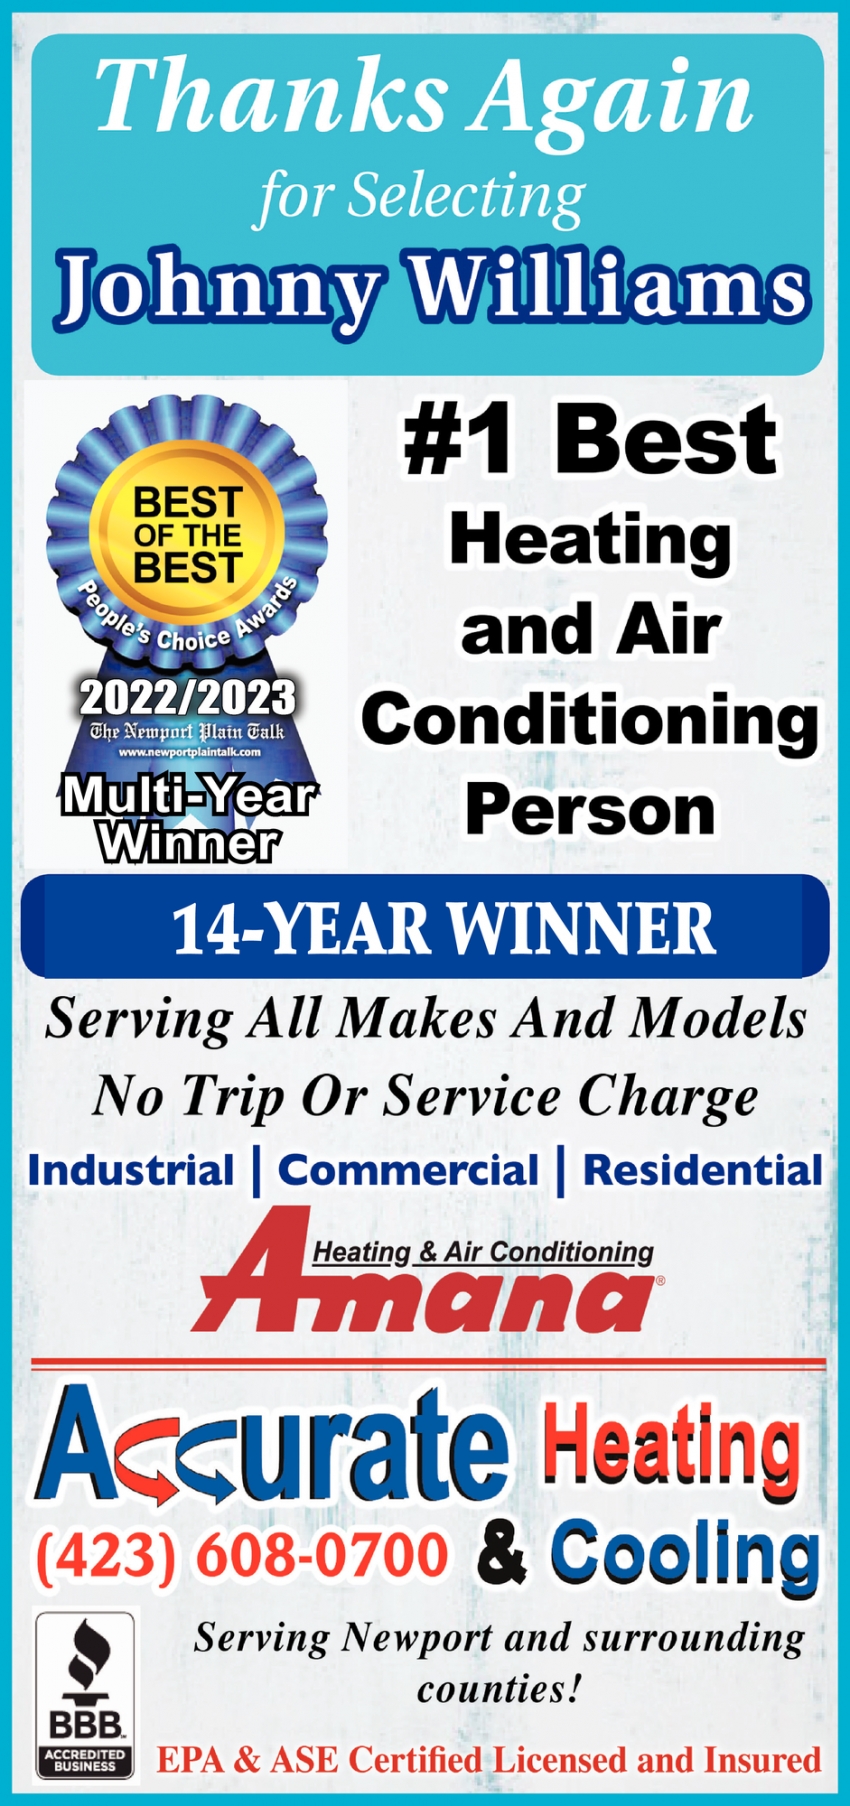 #1 Best Heating and Air Conditioning Person